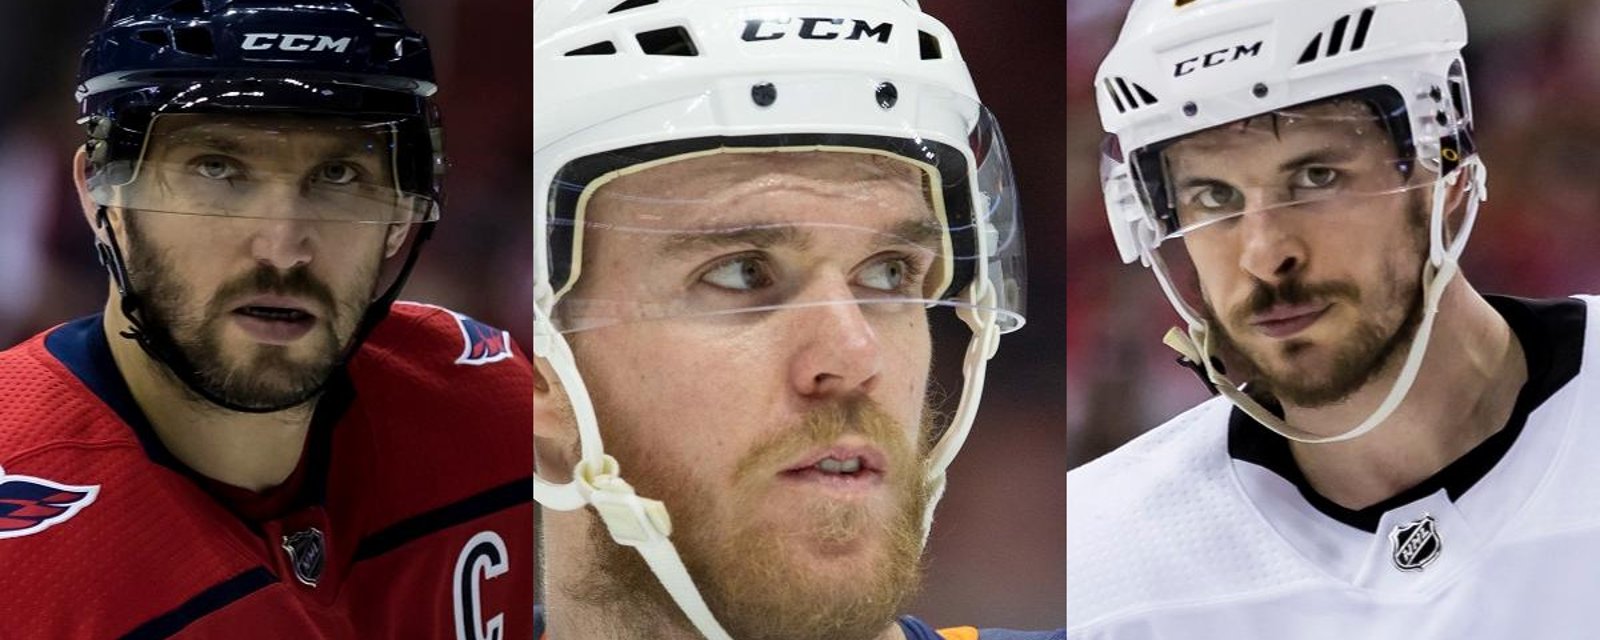 McDavid, Crosby and Ovechkin combine to set a new NHL record.